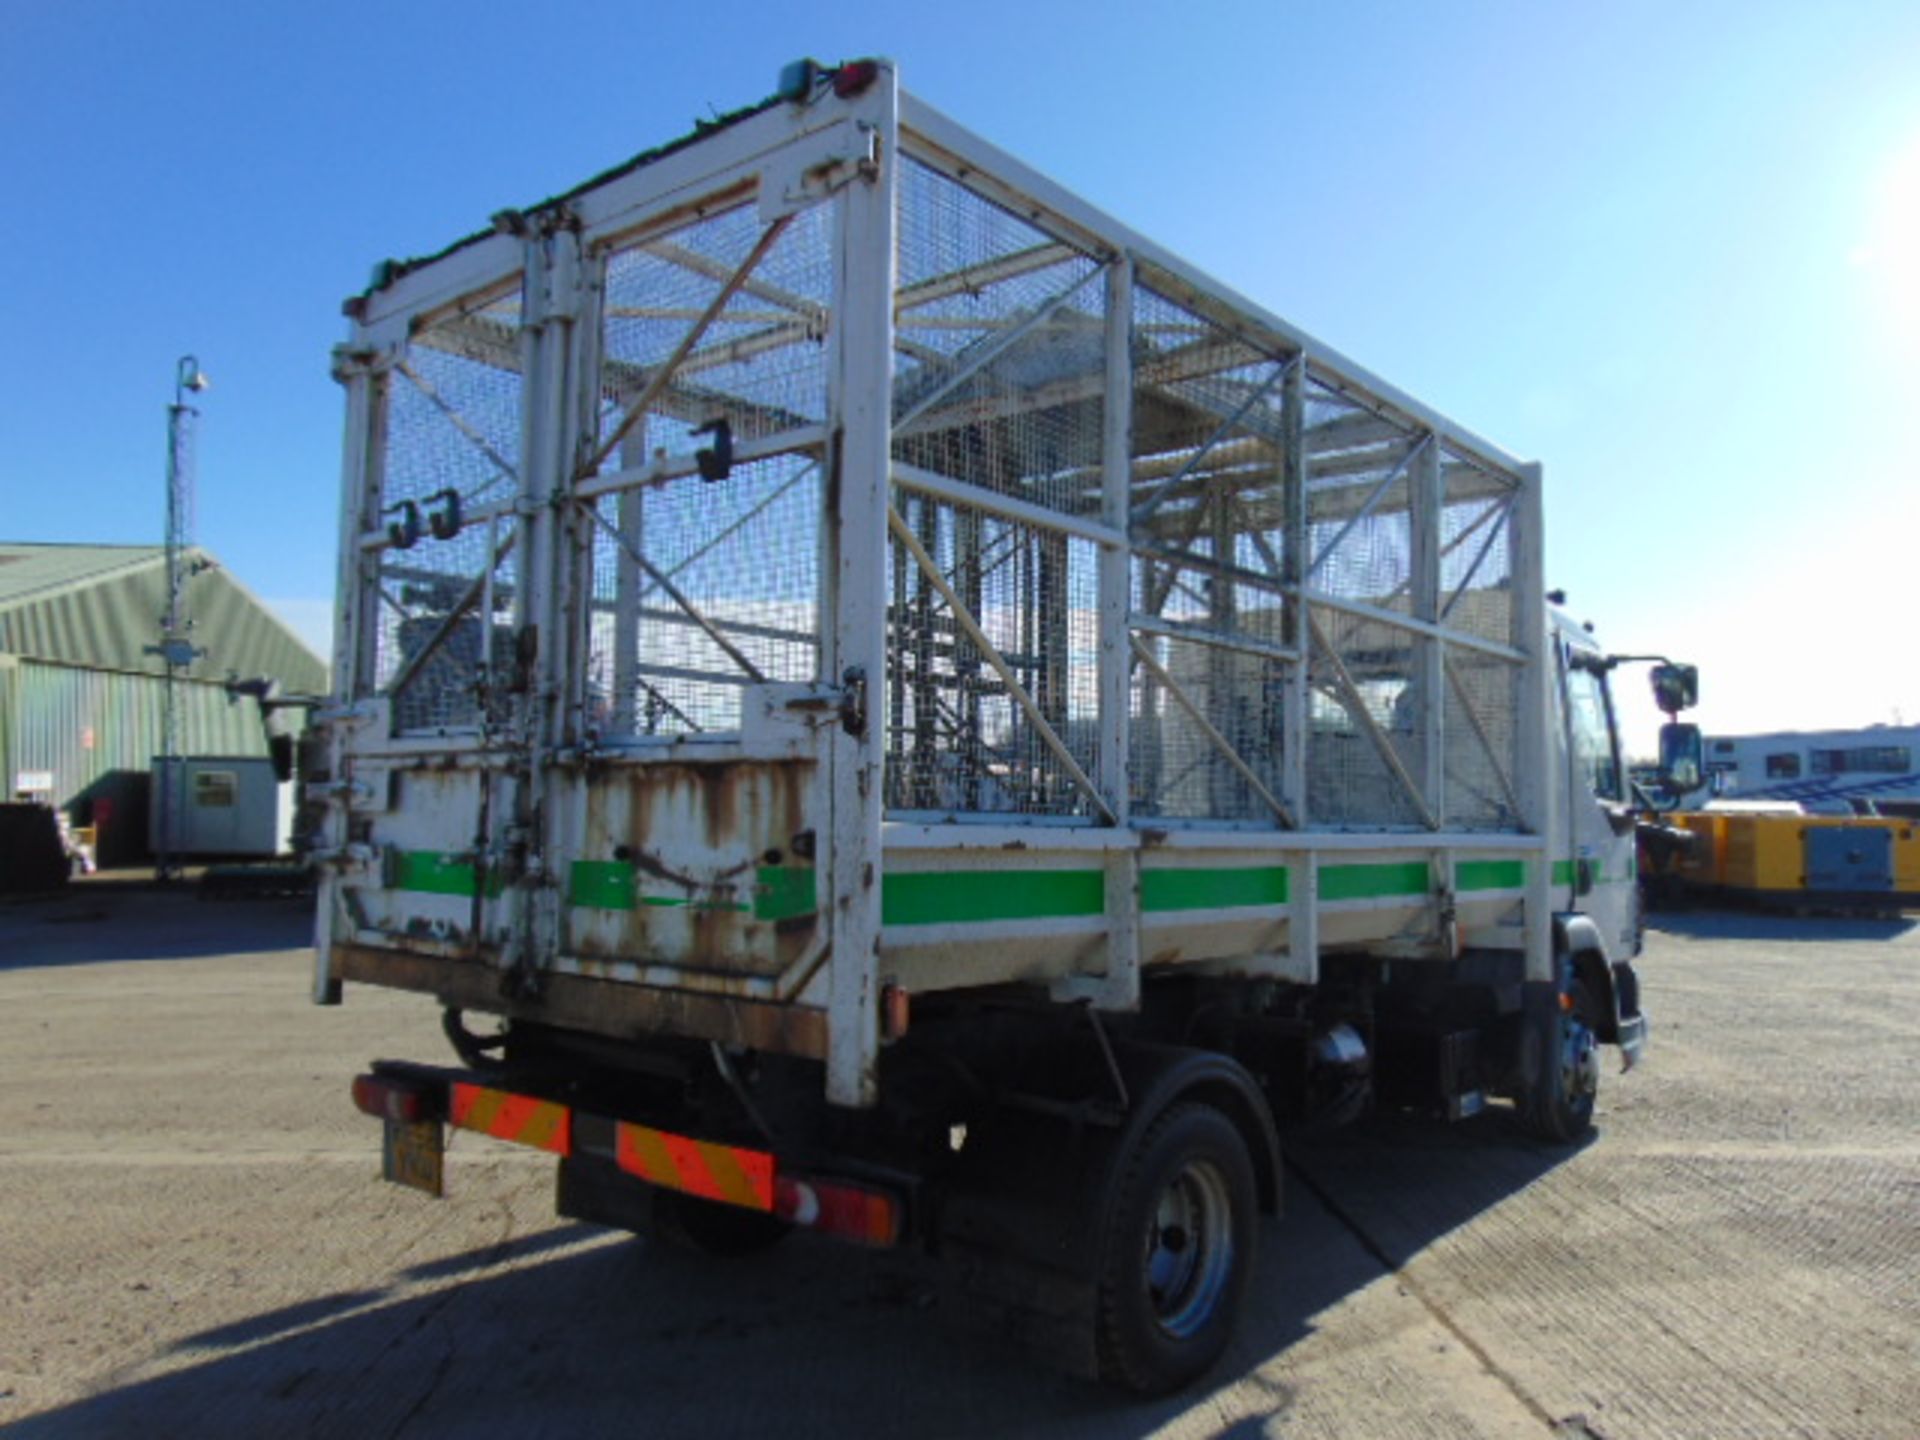 2008 DAF LF 45.140 C/W Refuse Cage, Rear Tipping Body and Side Bin Lift - Image 6 of 26